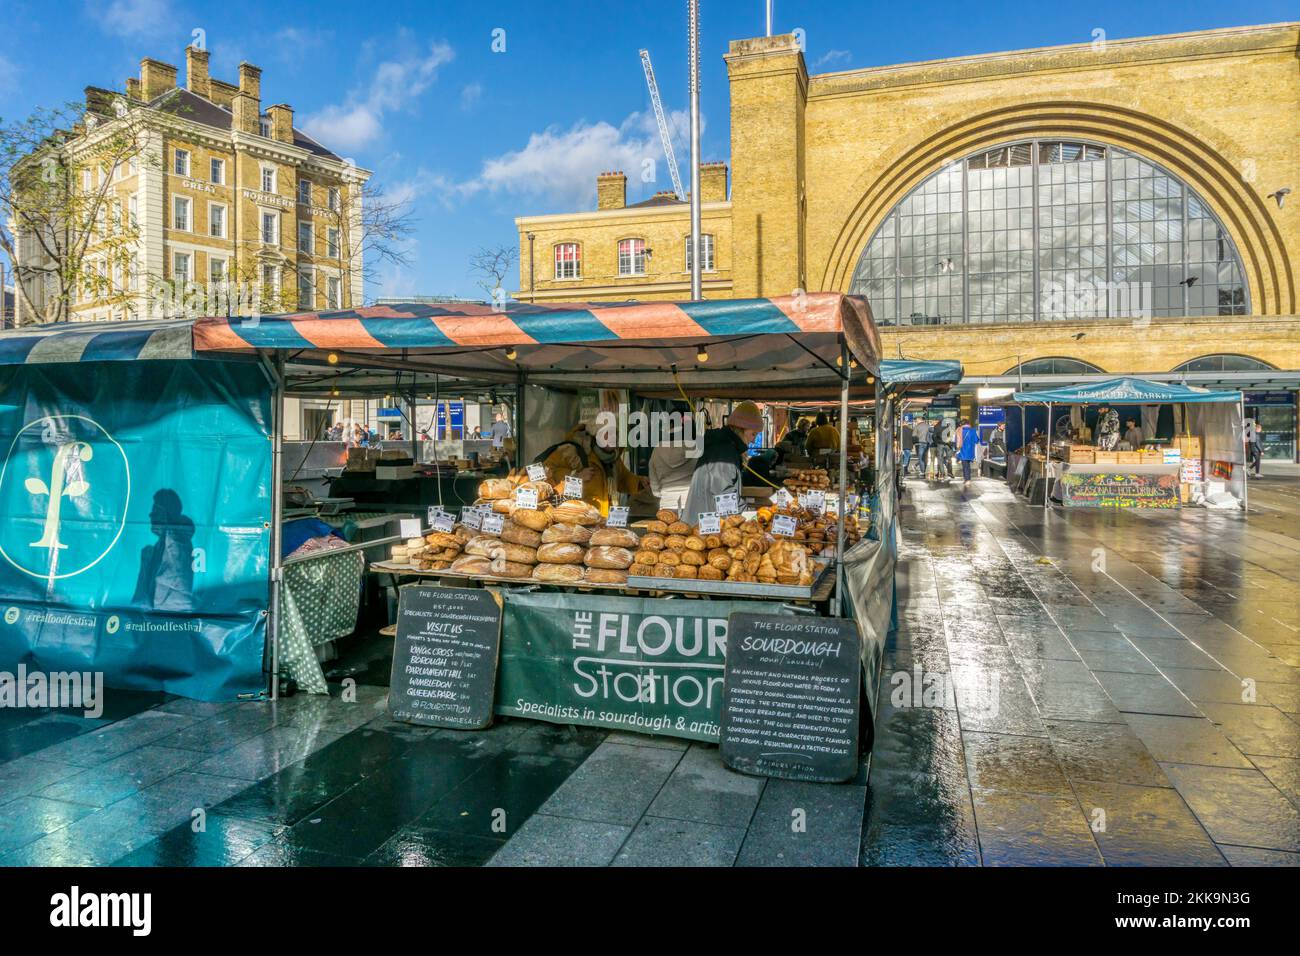 The Flour Station bread stall on a food market outside King's Cross railway station, London. Stock Photo